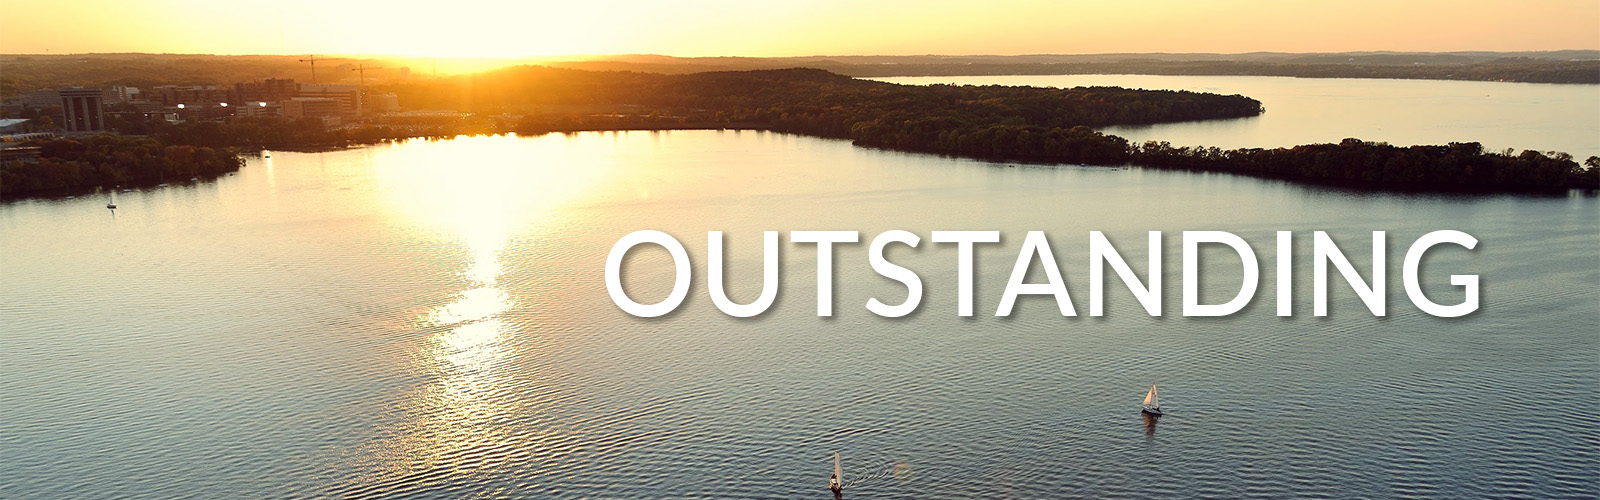 The word "Outstanding" is overlayed on a photo of sailboats dot Lake Mendota in an aerial view of the University of Wisconsin-Madison campus shoreline during an autumn sunset. On the horizon at right is a silhouette of Picnic Point, to the left is the medical campus.